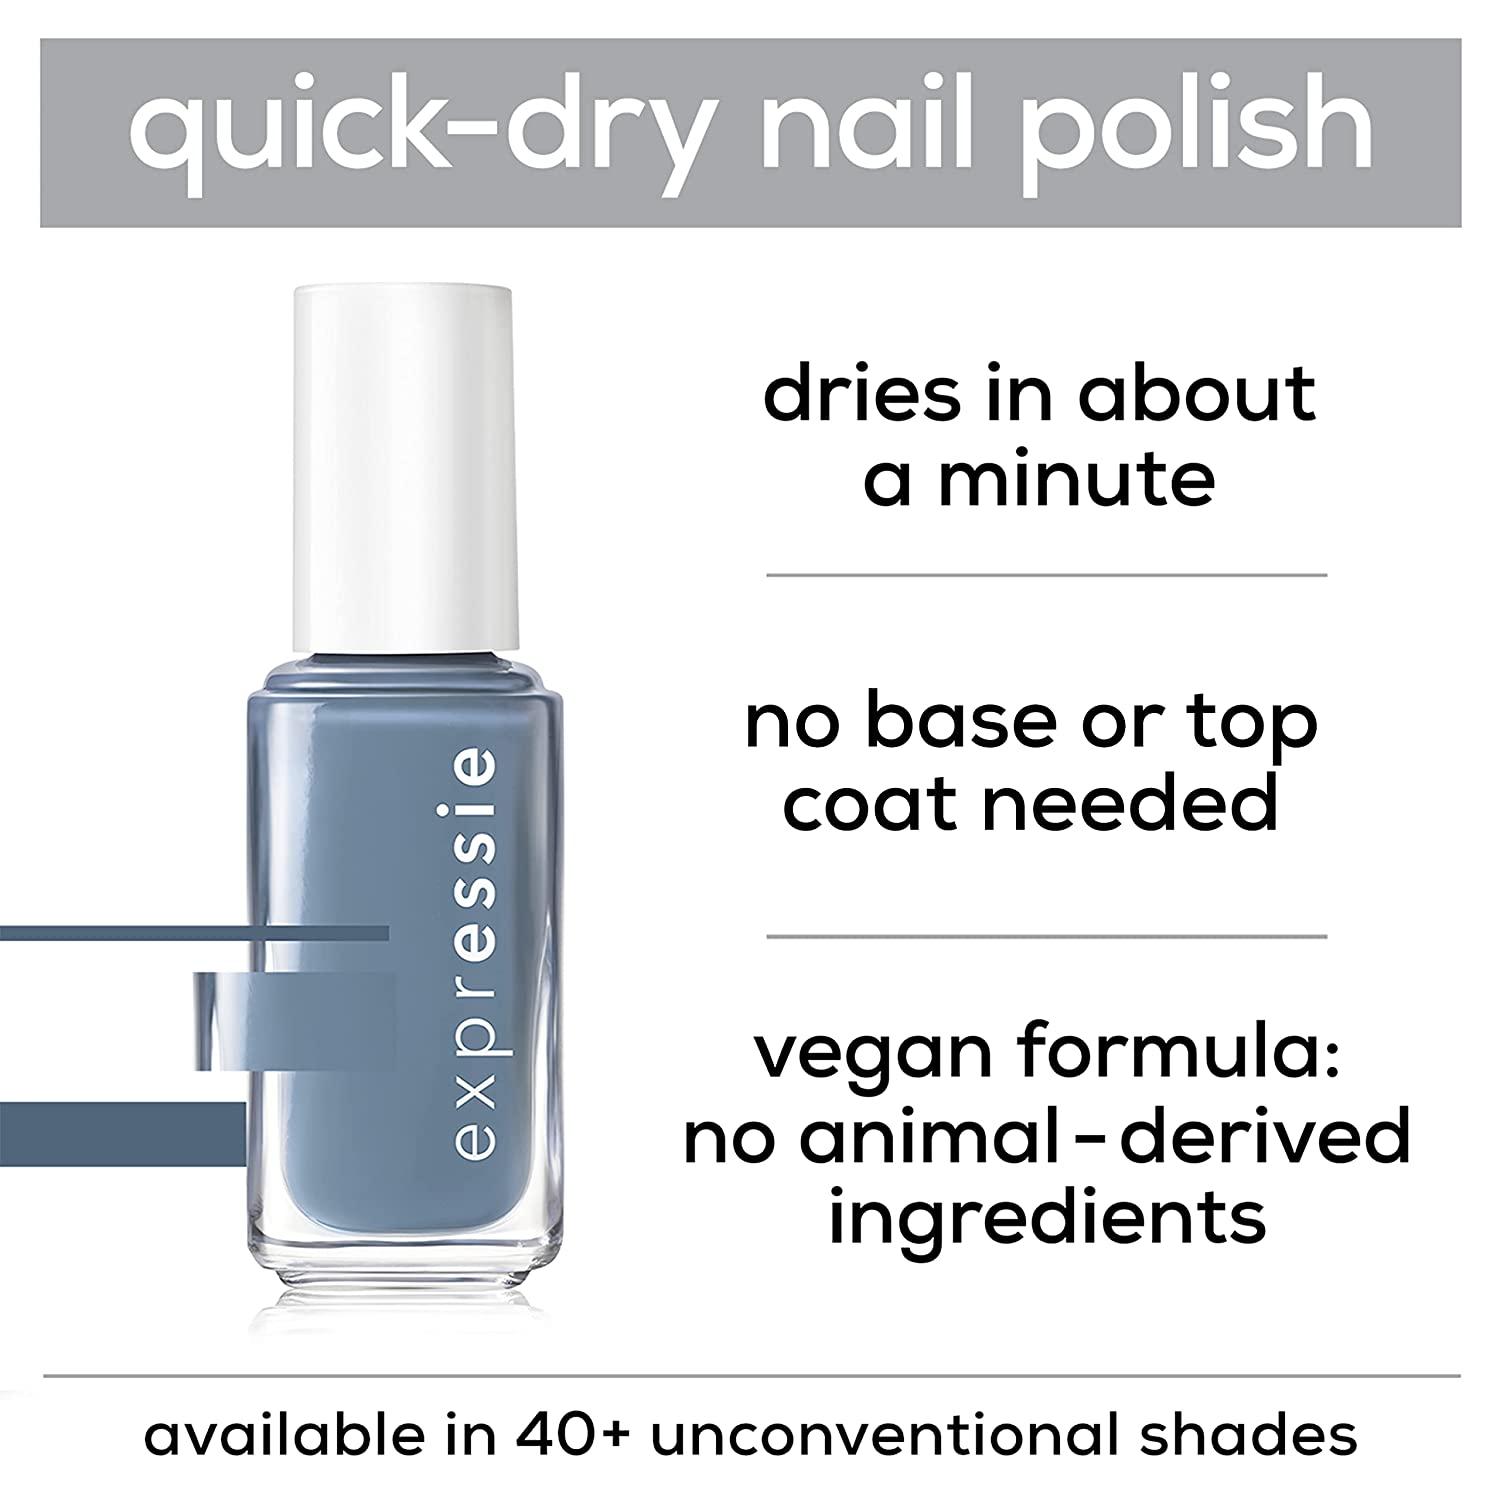 essie expressie Quick-Dry Nail Fl destiny Destiny, 8-Free of 0.33 1) with with sk8 Vegan, with undertones) blue 0.33 Oz Destiny, Polish, Lilac, Sk8 Ounce (lilac with Sk8 356 (Pack